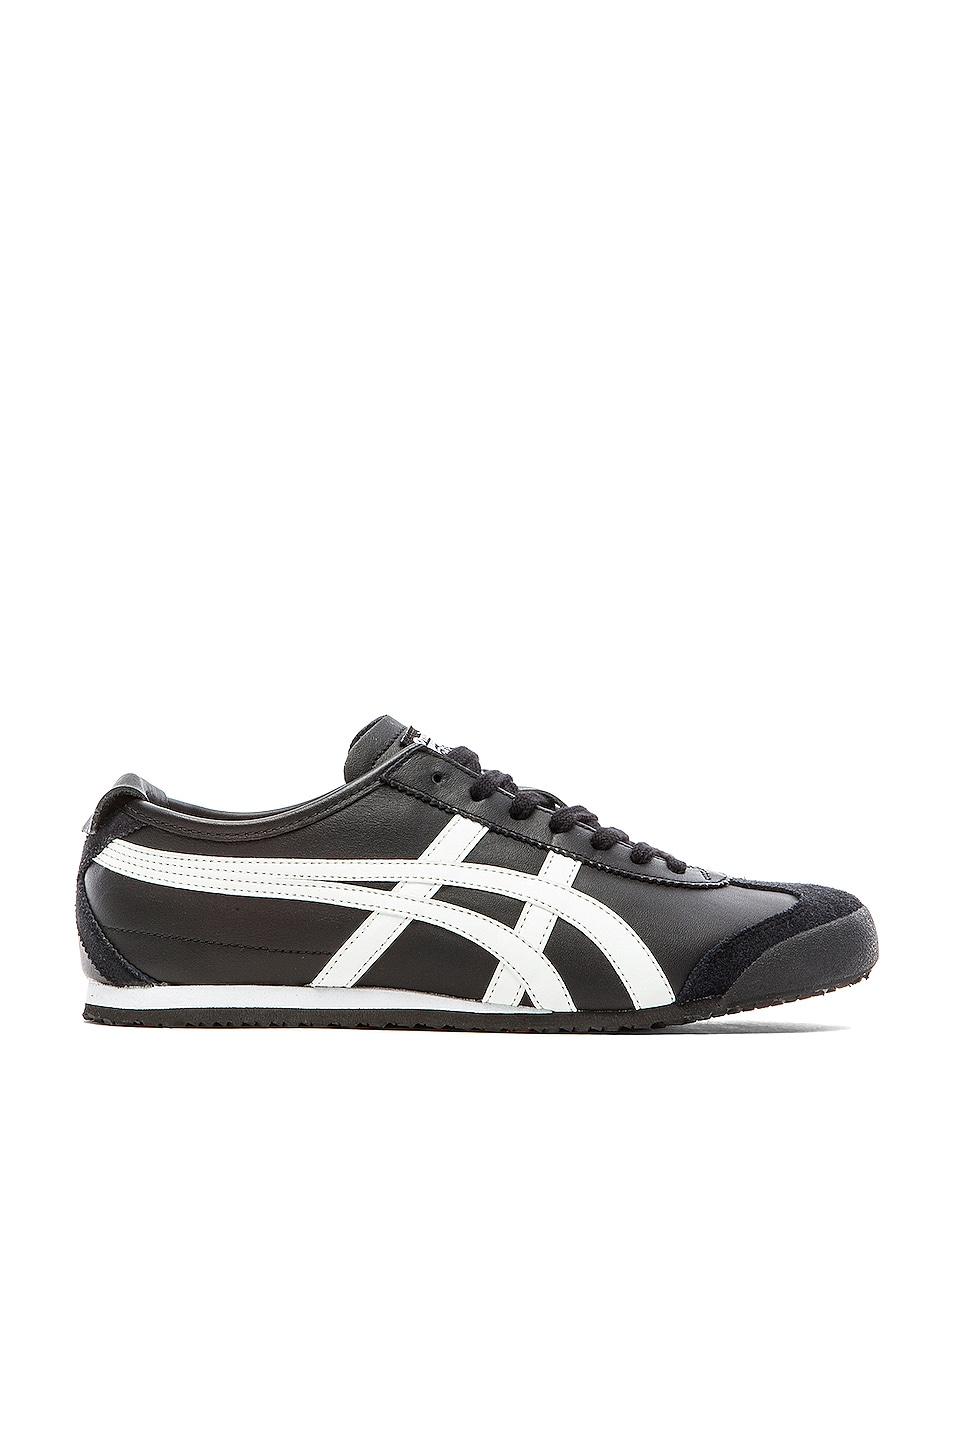 Black/Black Suede Details about   Onitsuka Tiger Shoes Mexico 66 